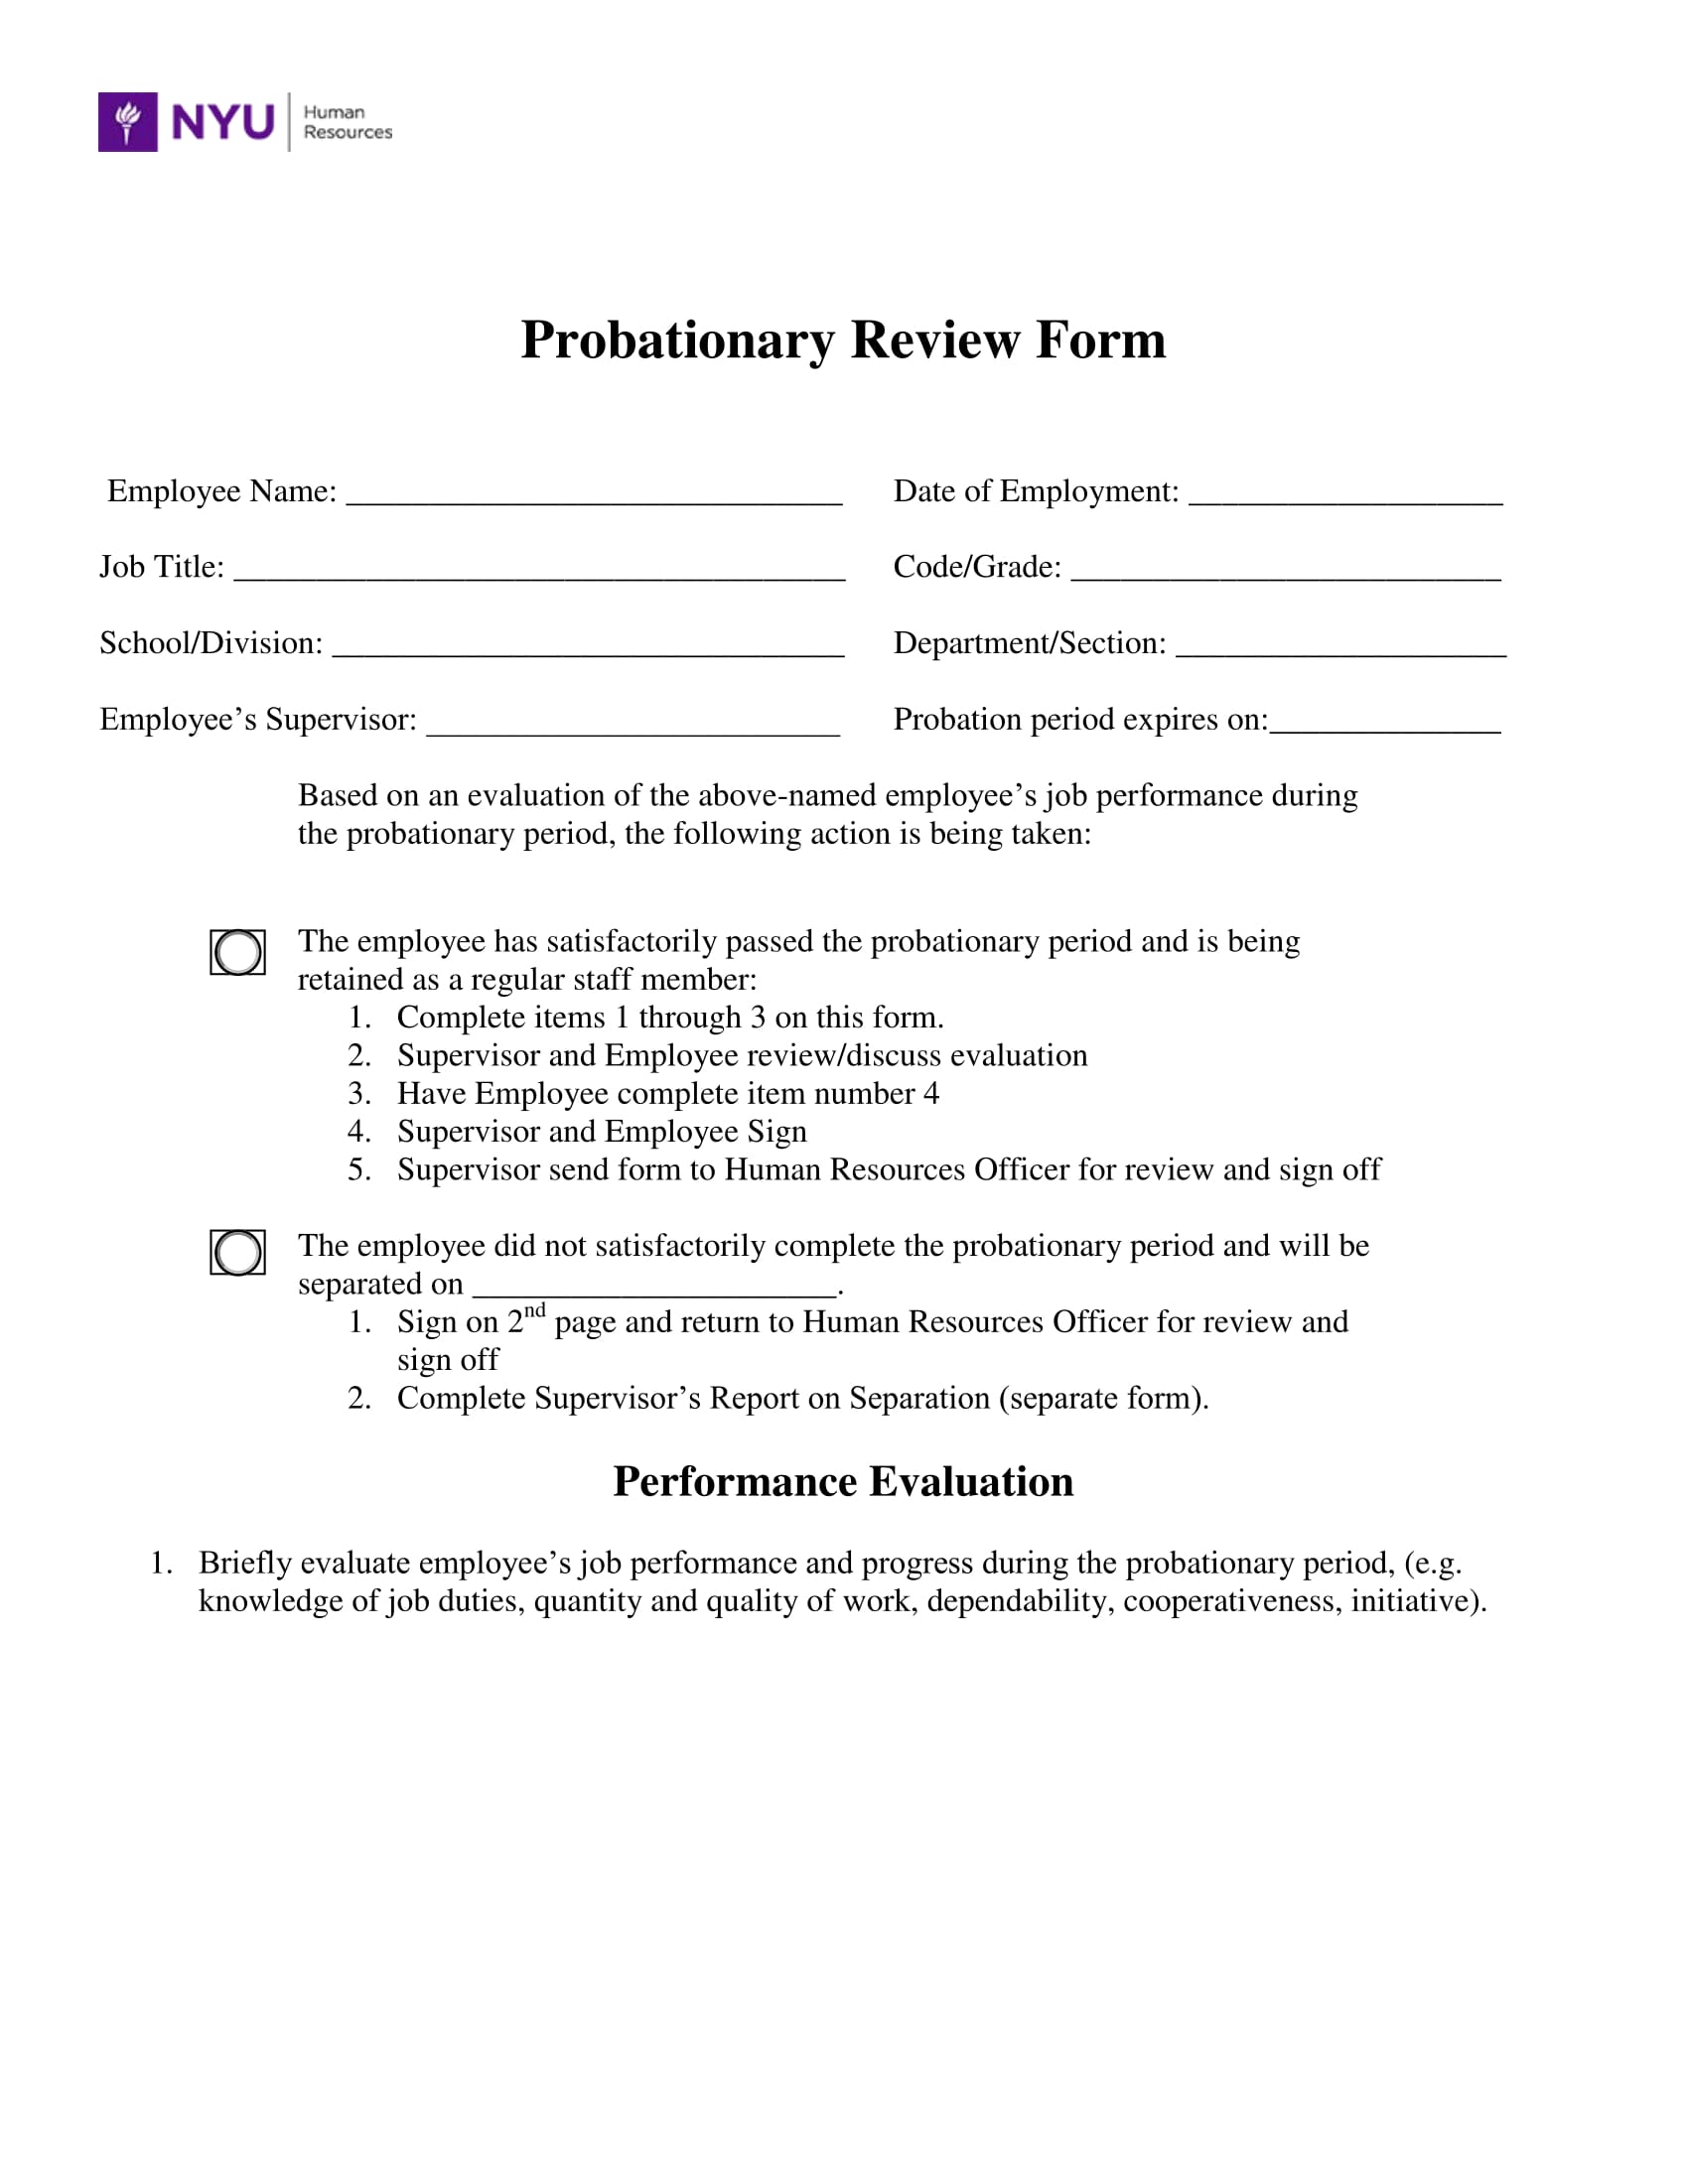 employee probationary review form 1